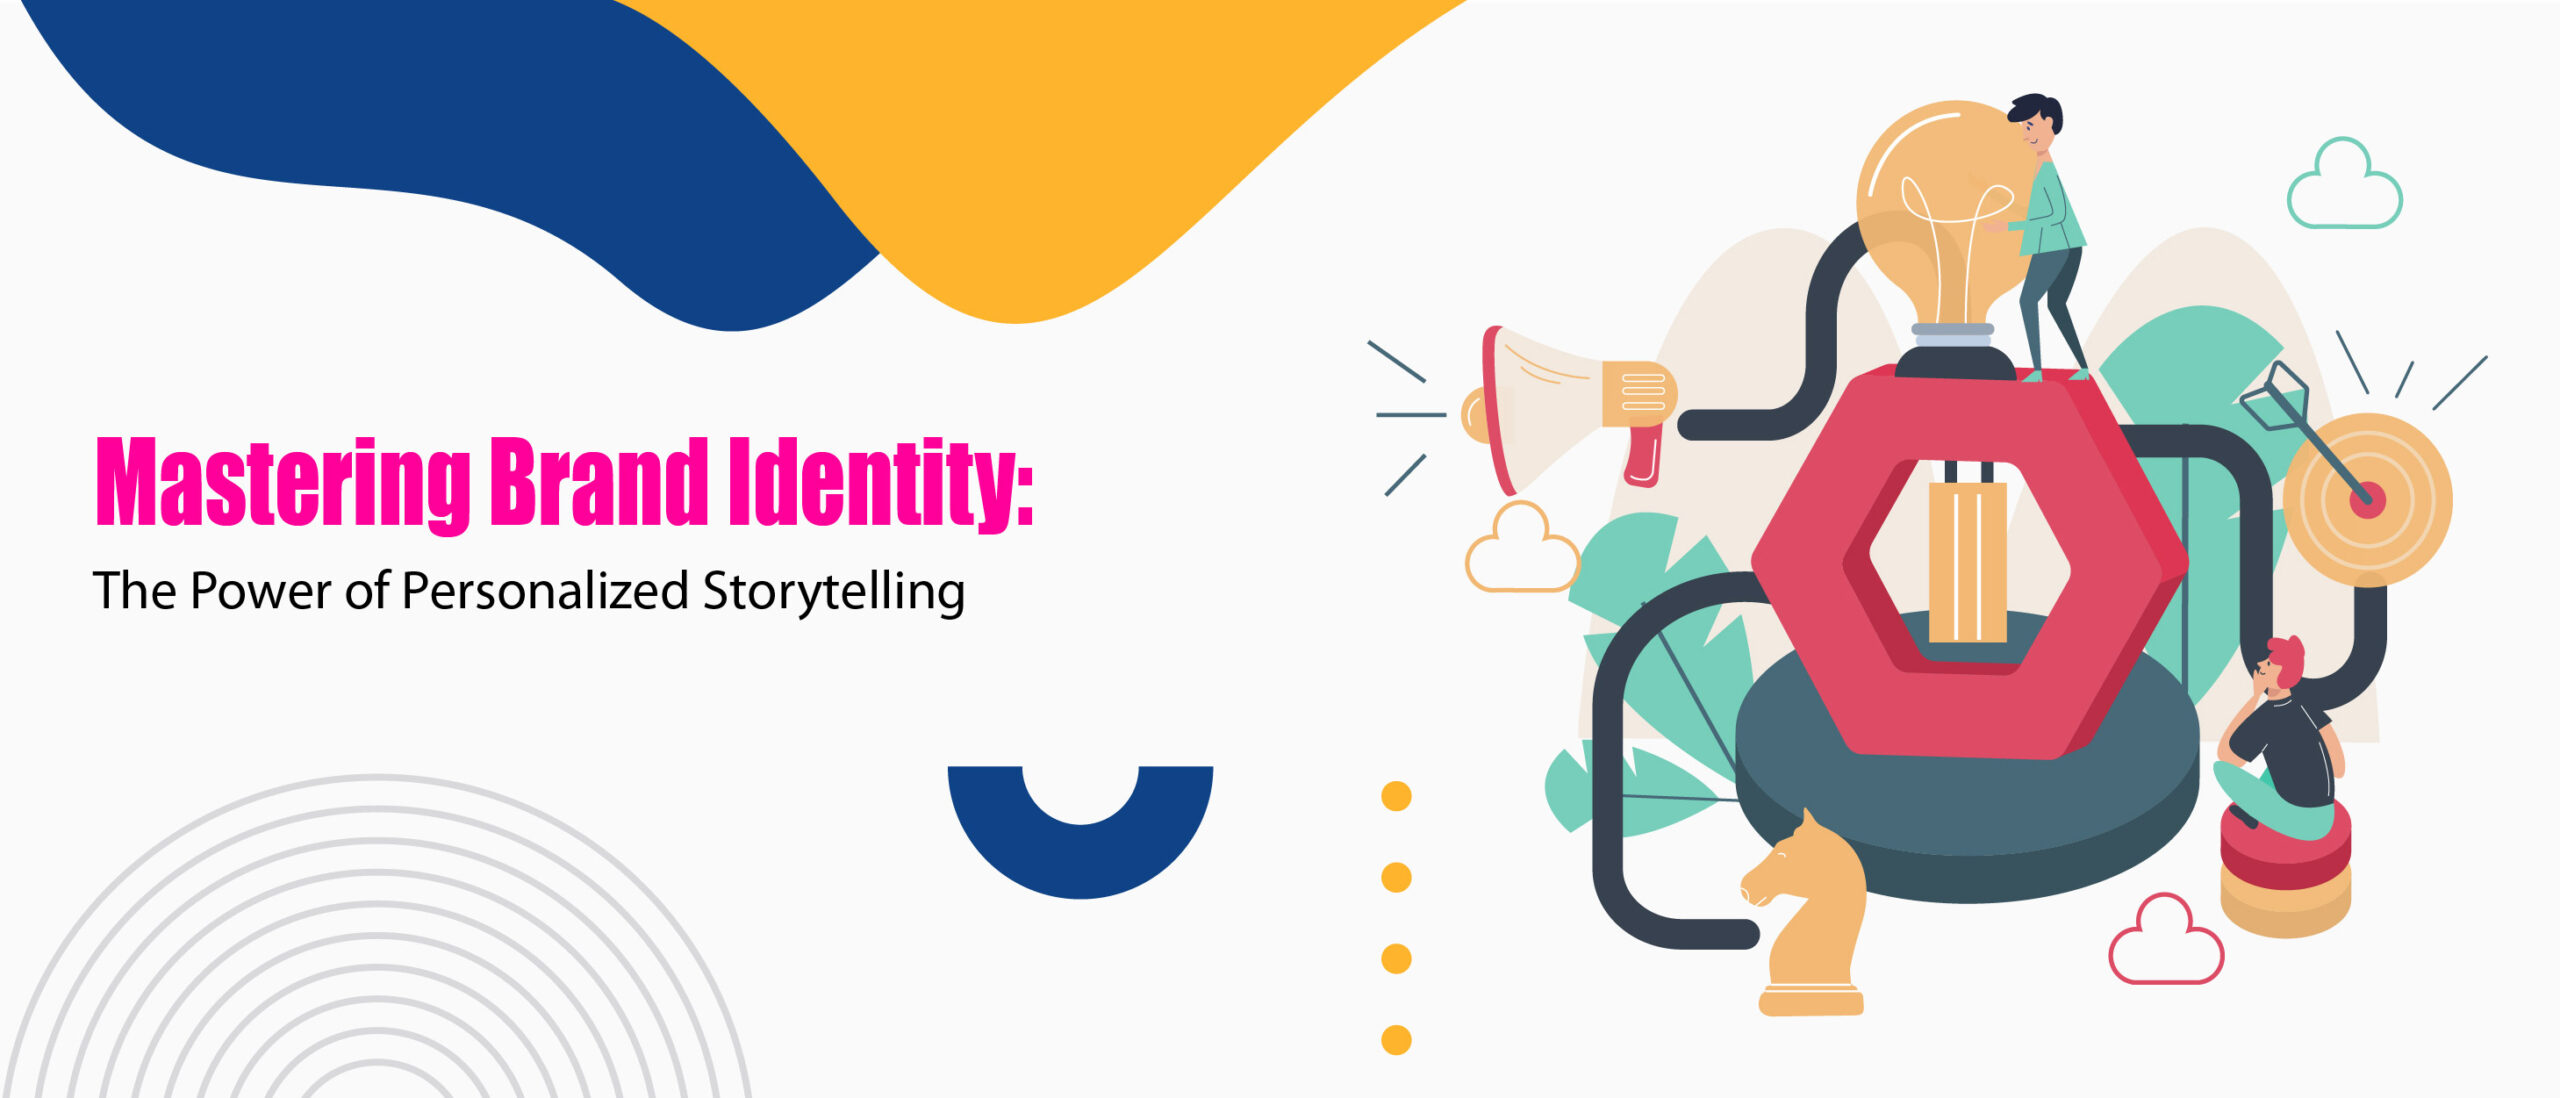 Mastering Brand Identity: The Power of Personalized Storytelling